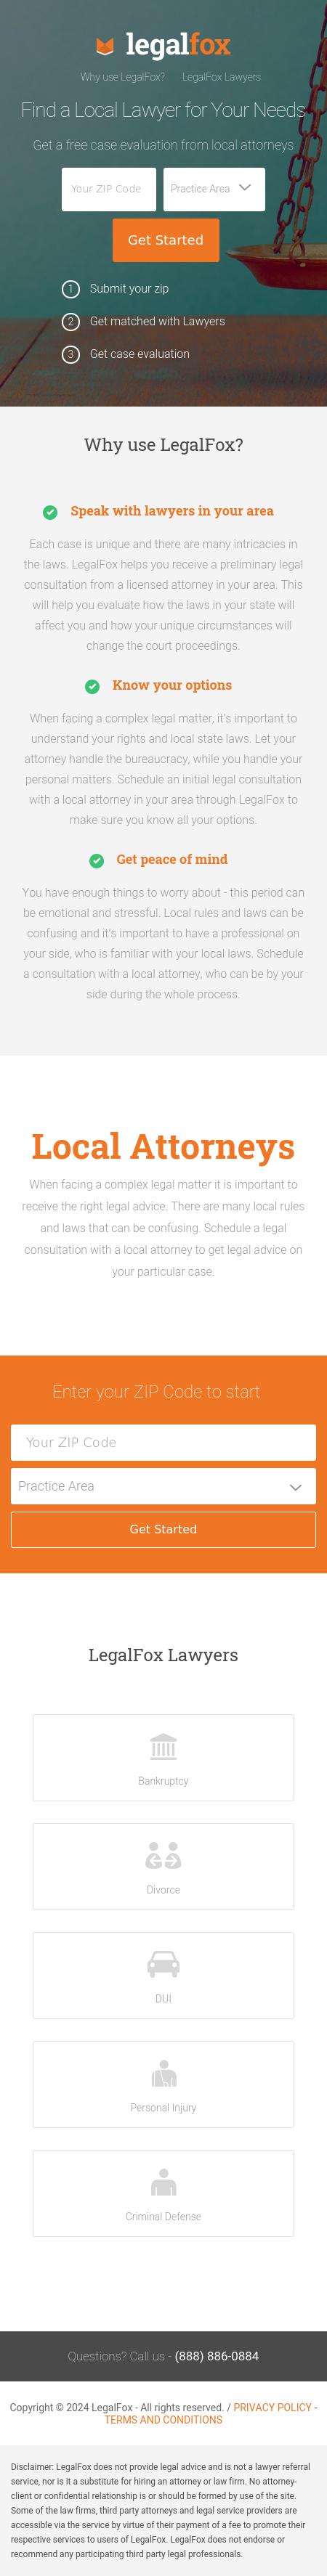 Find a Local Attorney - Mount Clemens MI Lawyers